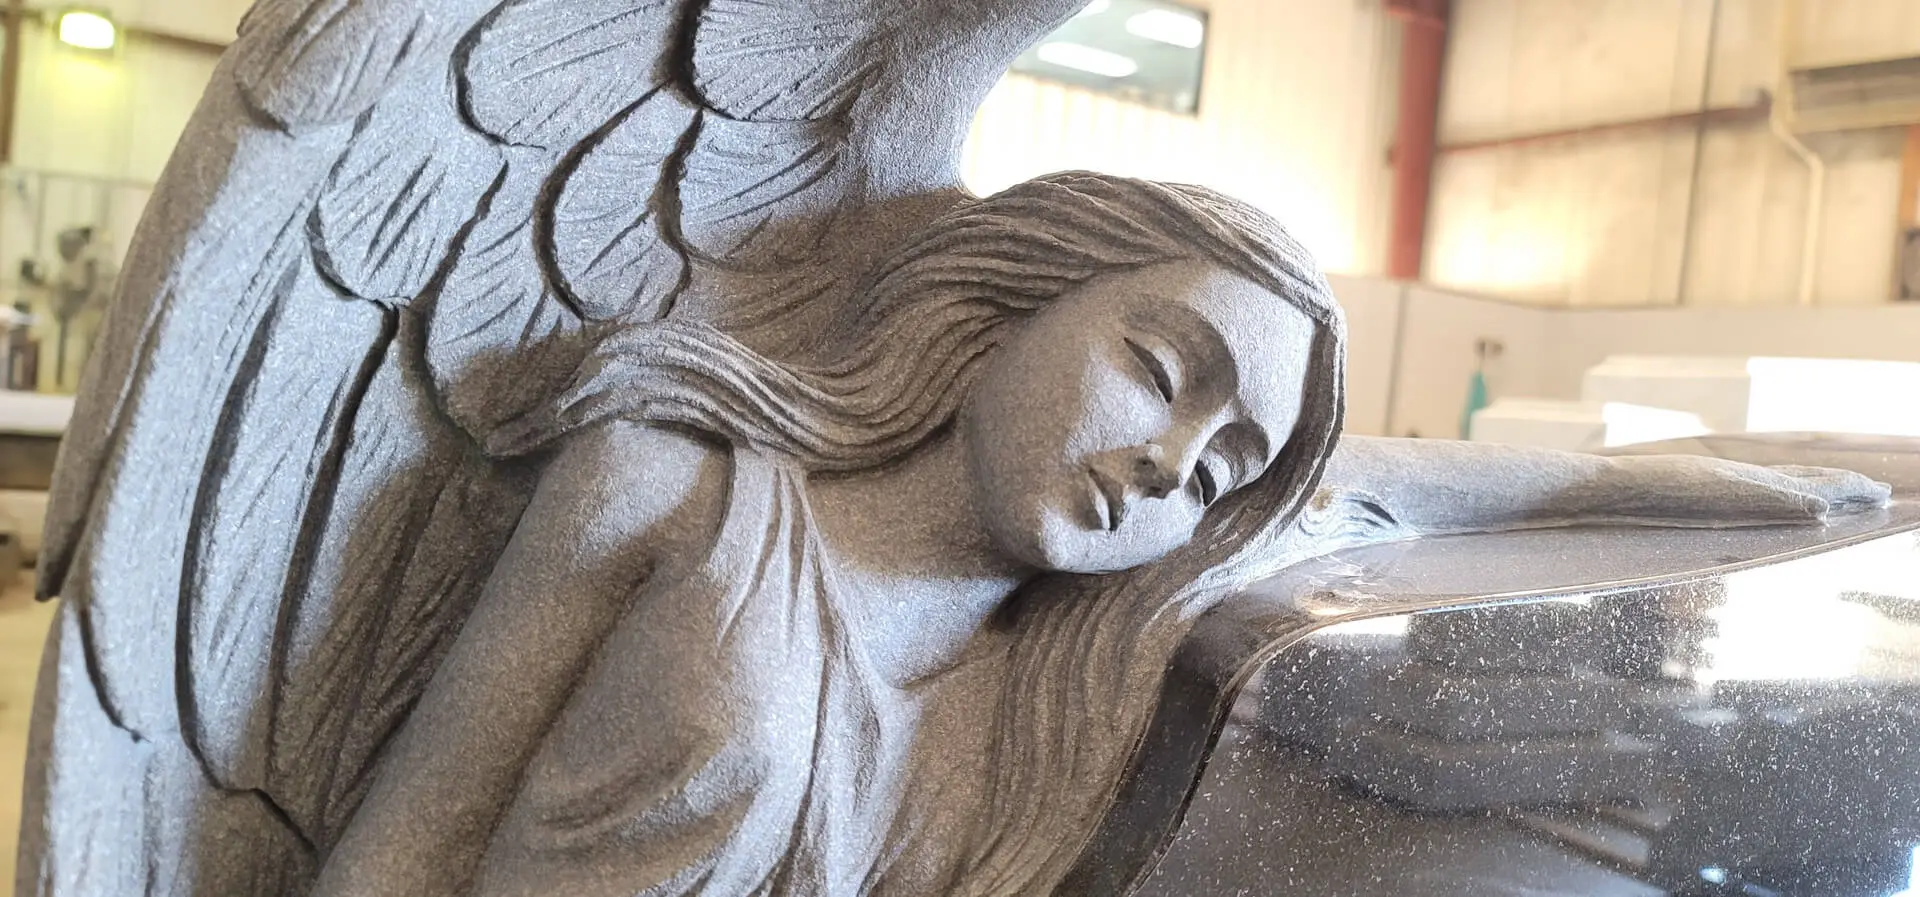 A beautiful statue of an angel with wings lying on the ground